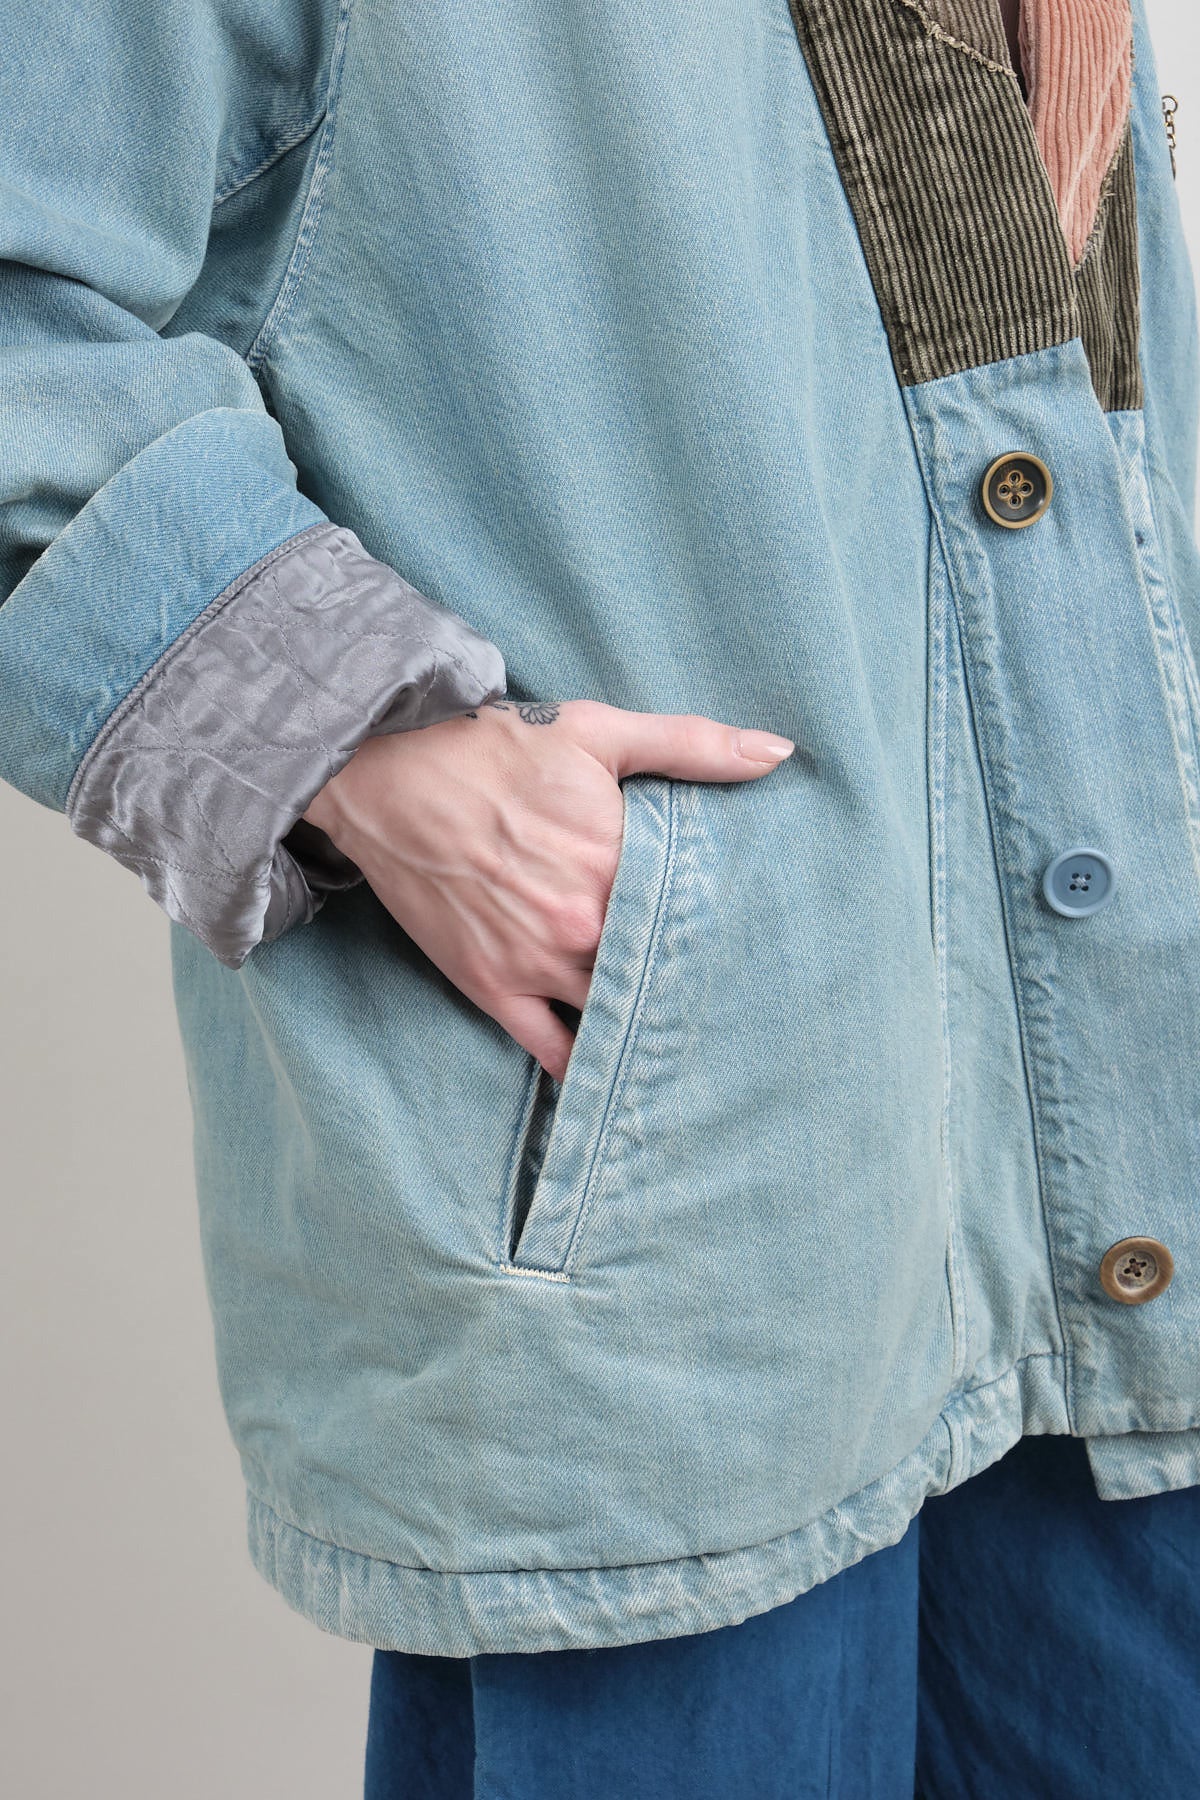 11.5 oz Denim Dotera Jacket with hand and zipper chest pockets